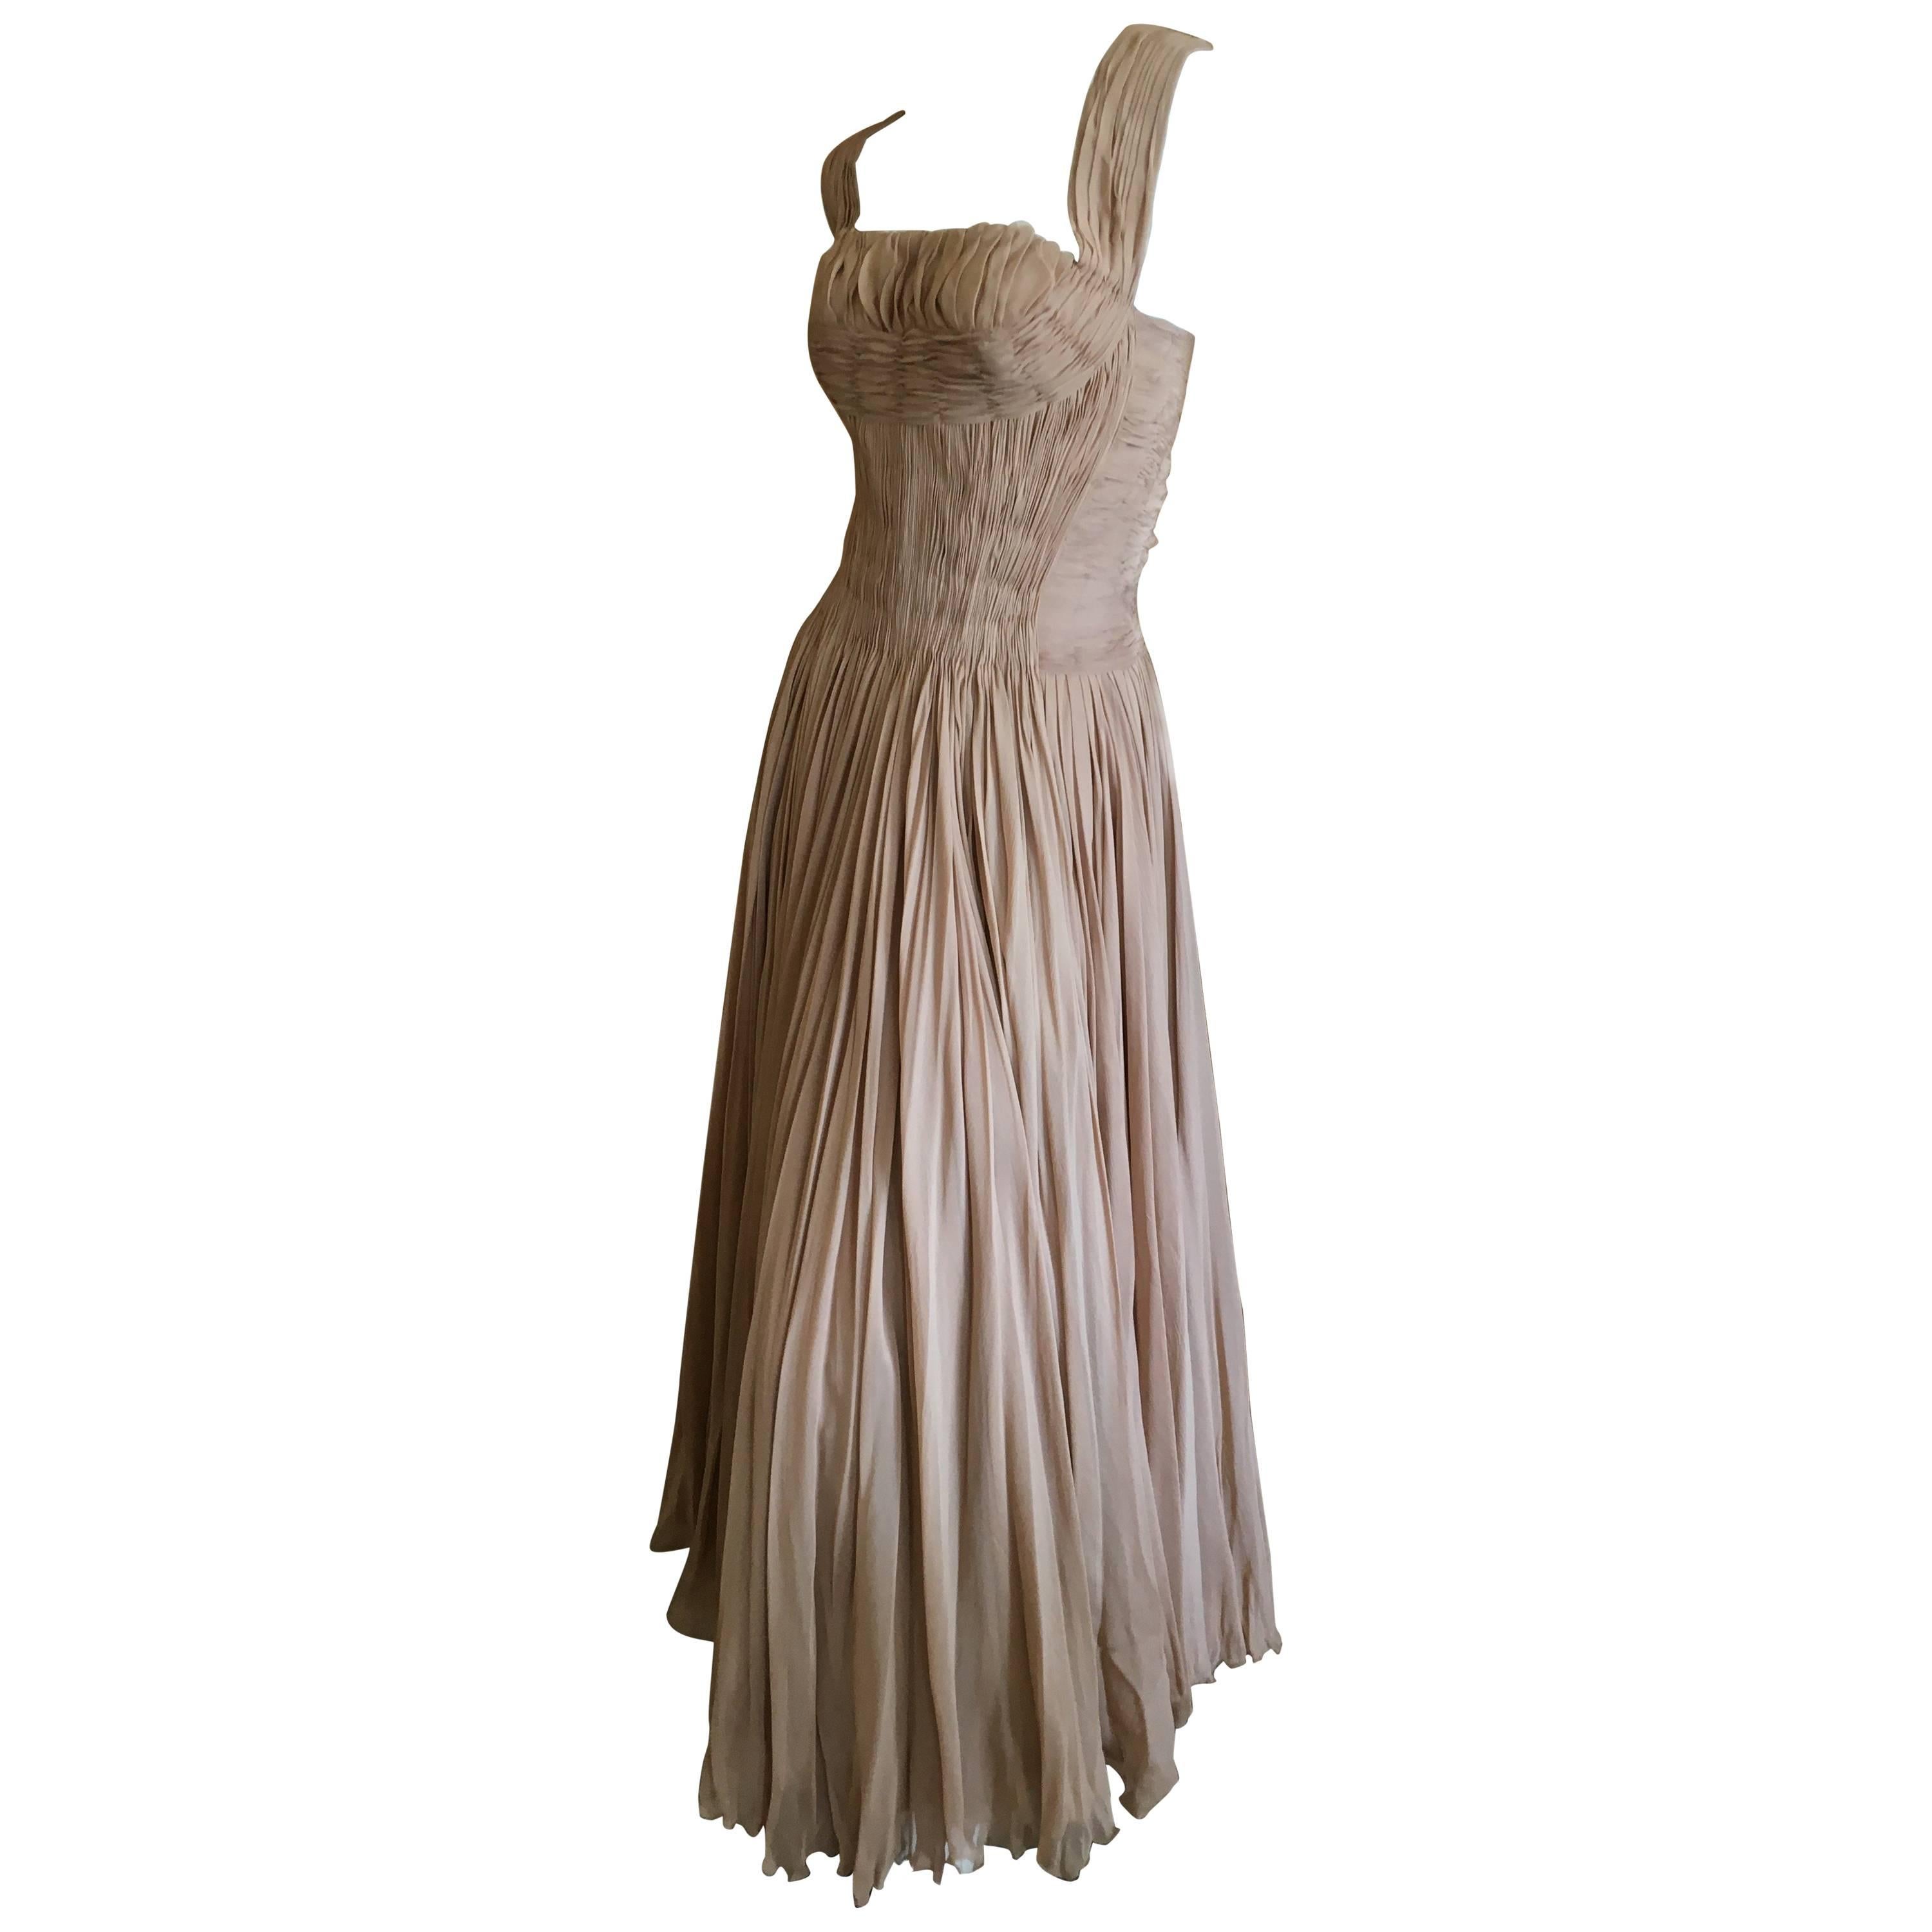 Carven Paris Haute Couture 1949 Pin Tuck Pleated Evening Dress For Sale